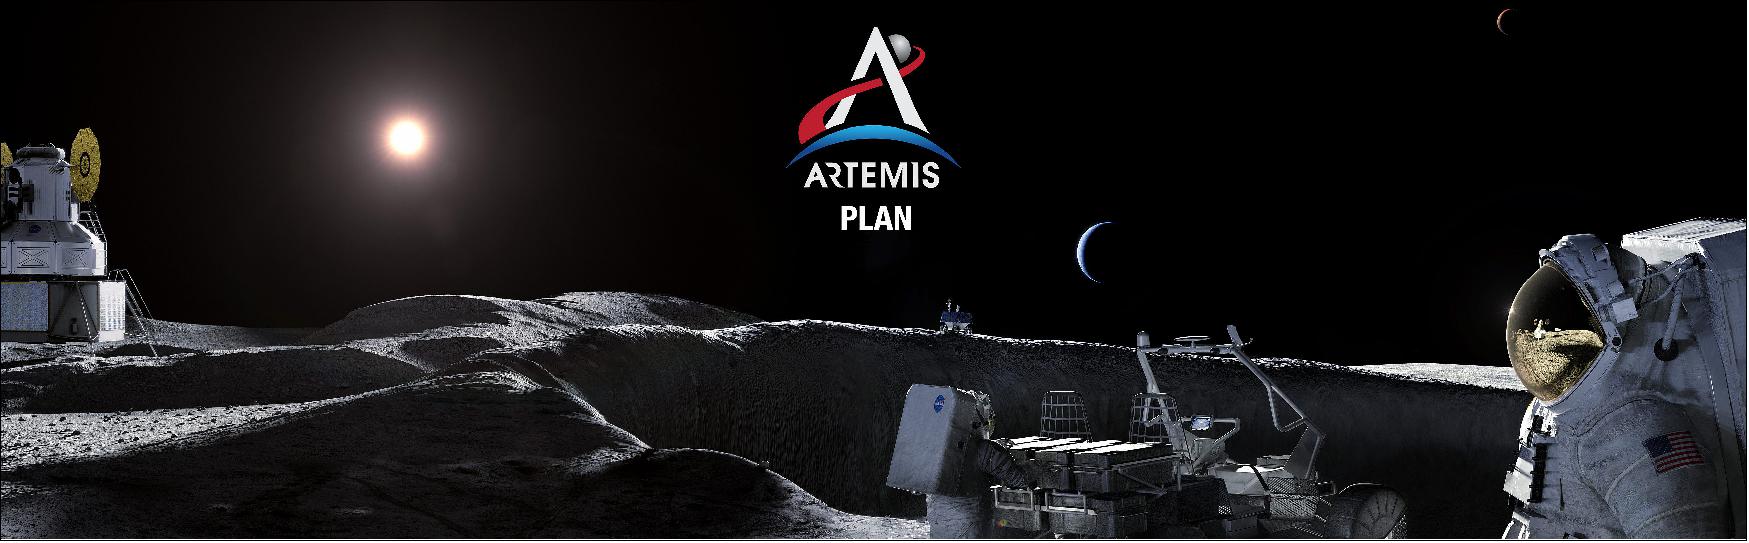 Figure 34: Following a series of critical contract awards and hardware milestones, NASA has shared an update on its Artemis program, including the latest Phase 1 plans to land the first woman and the next man on the surface of the Moon in 2024 (image credit: NASA)